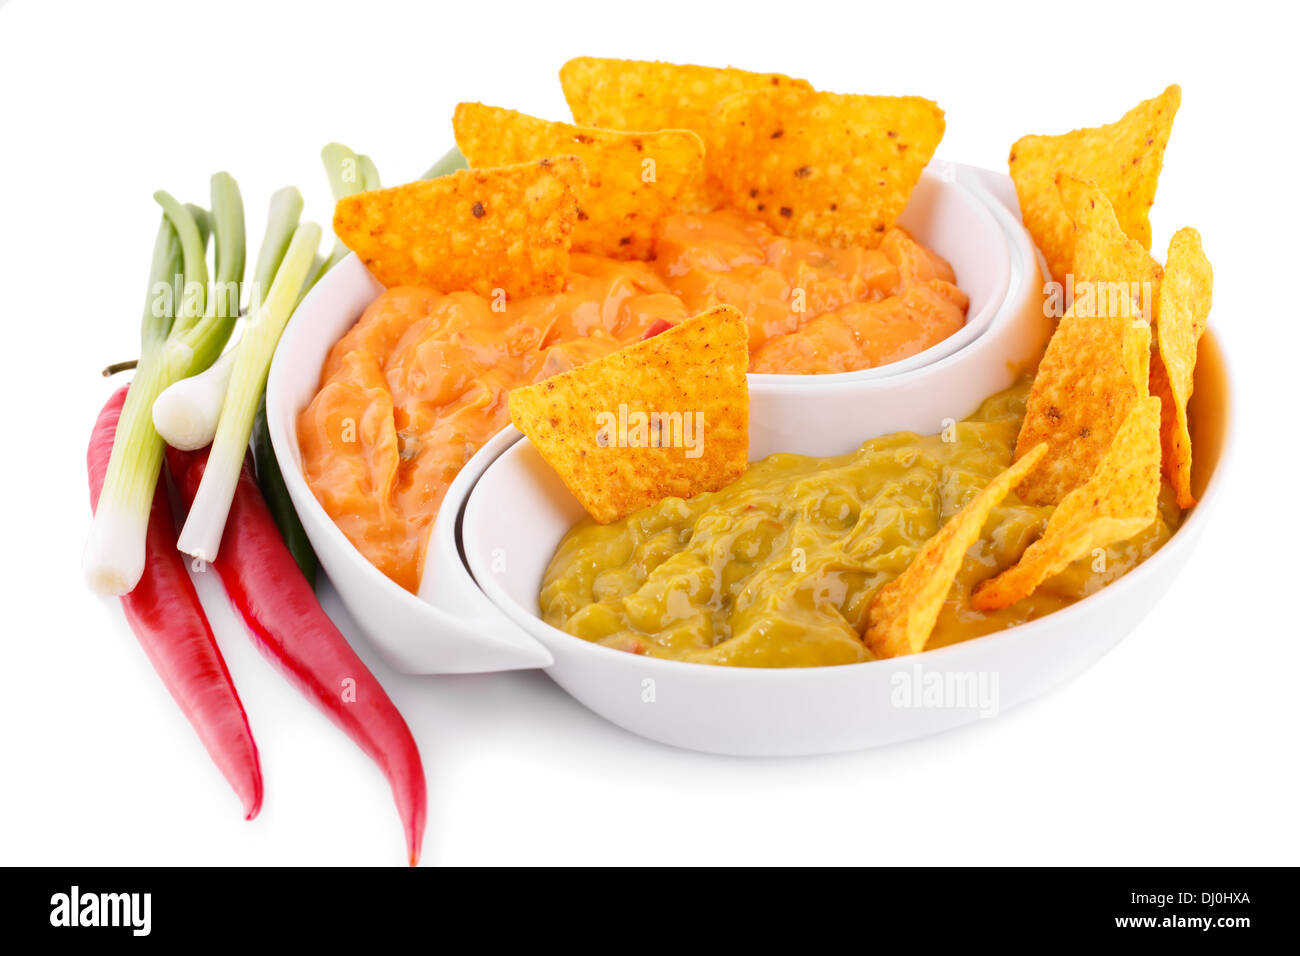 Nachos, guacamole and cheese sauce, vegetables isolated on white background. Stock Photo